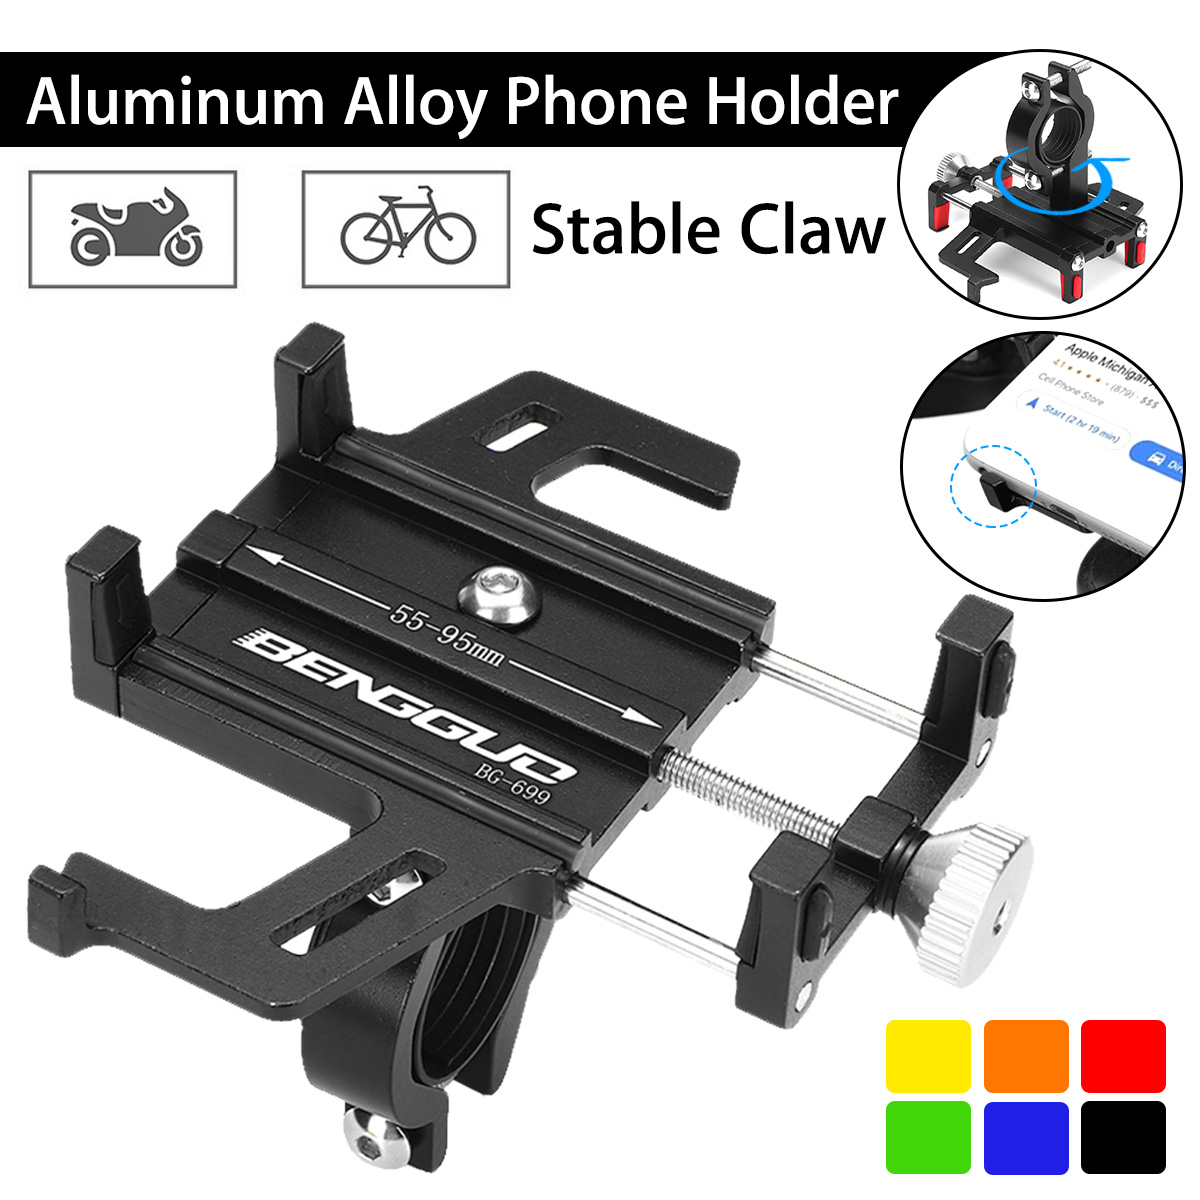 Aluminum-Alloy-Bicycle-Motorcycle-Handlebar-Phone-Holder-360ordm-Rotation-For-47-60-inch-Smart-Phone-1548748-1